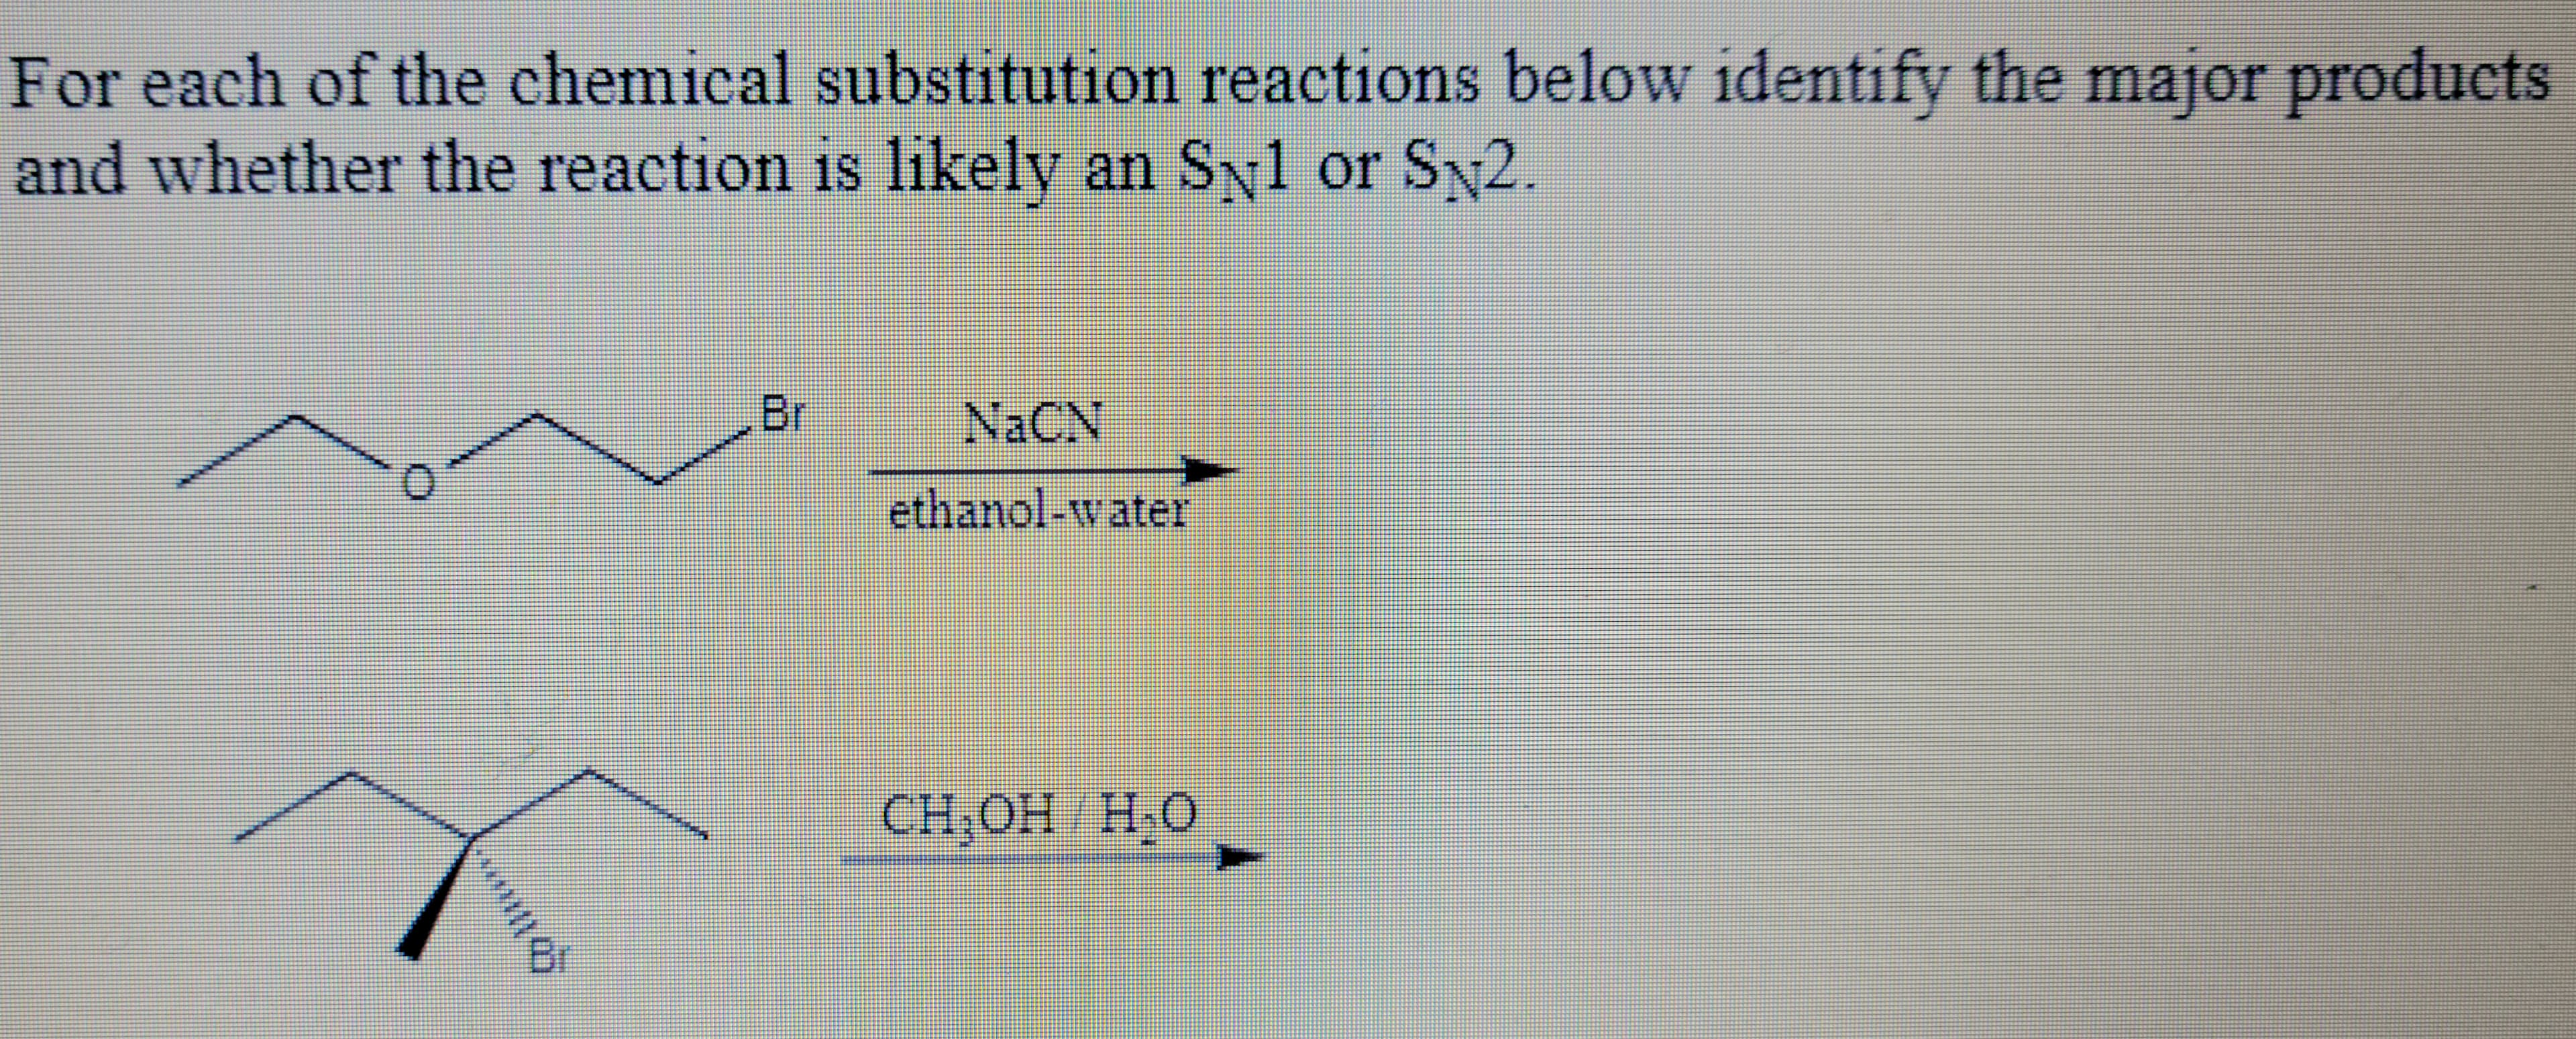 For each of the chemical substitution reactions below identify the major products
and whether the reaction is likely an Syl or SN2.
1
0
comm.
Br
NaCN
ethanol-water
CH₂OH/H₂O